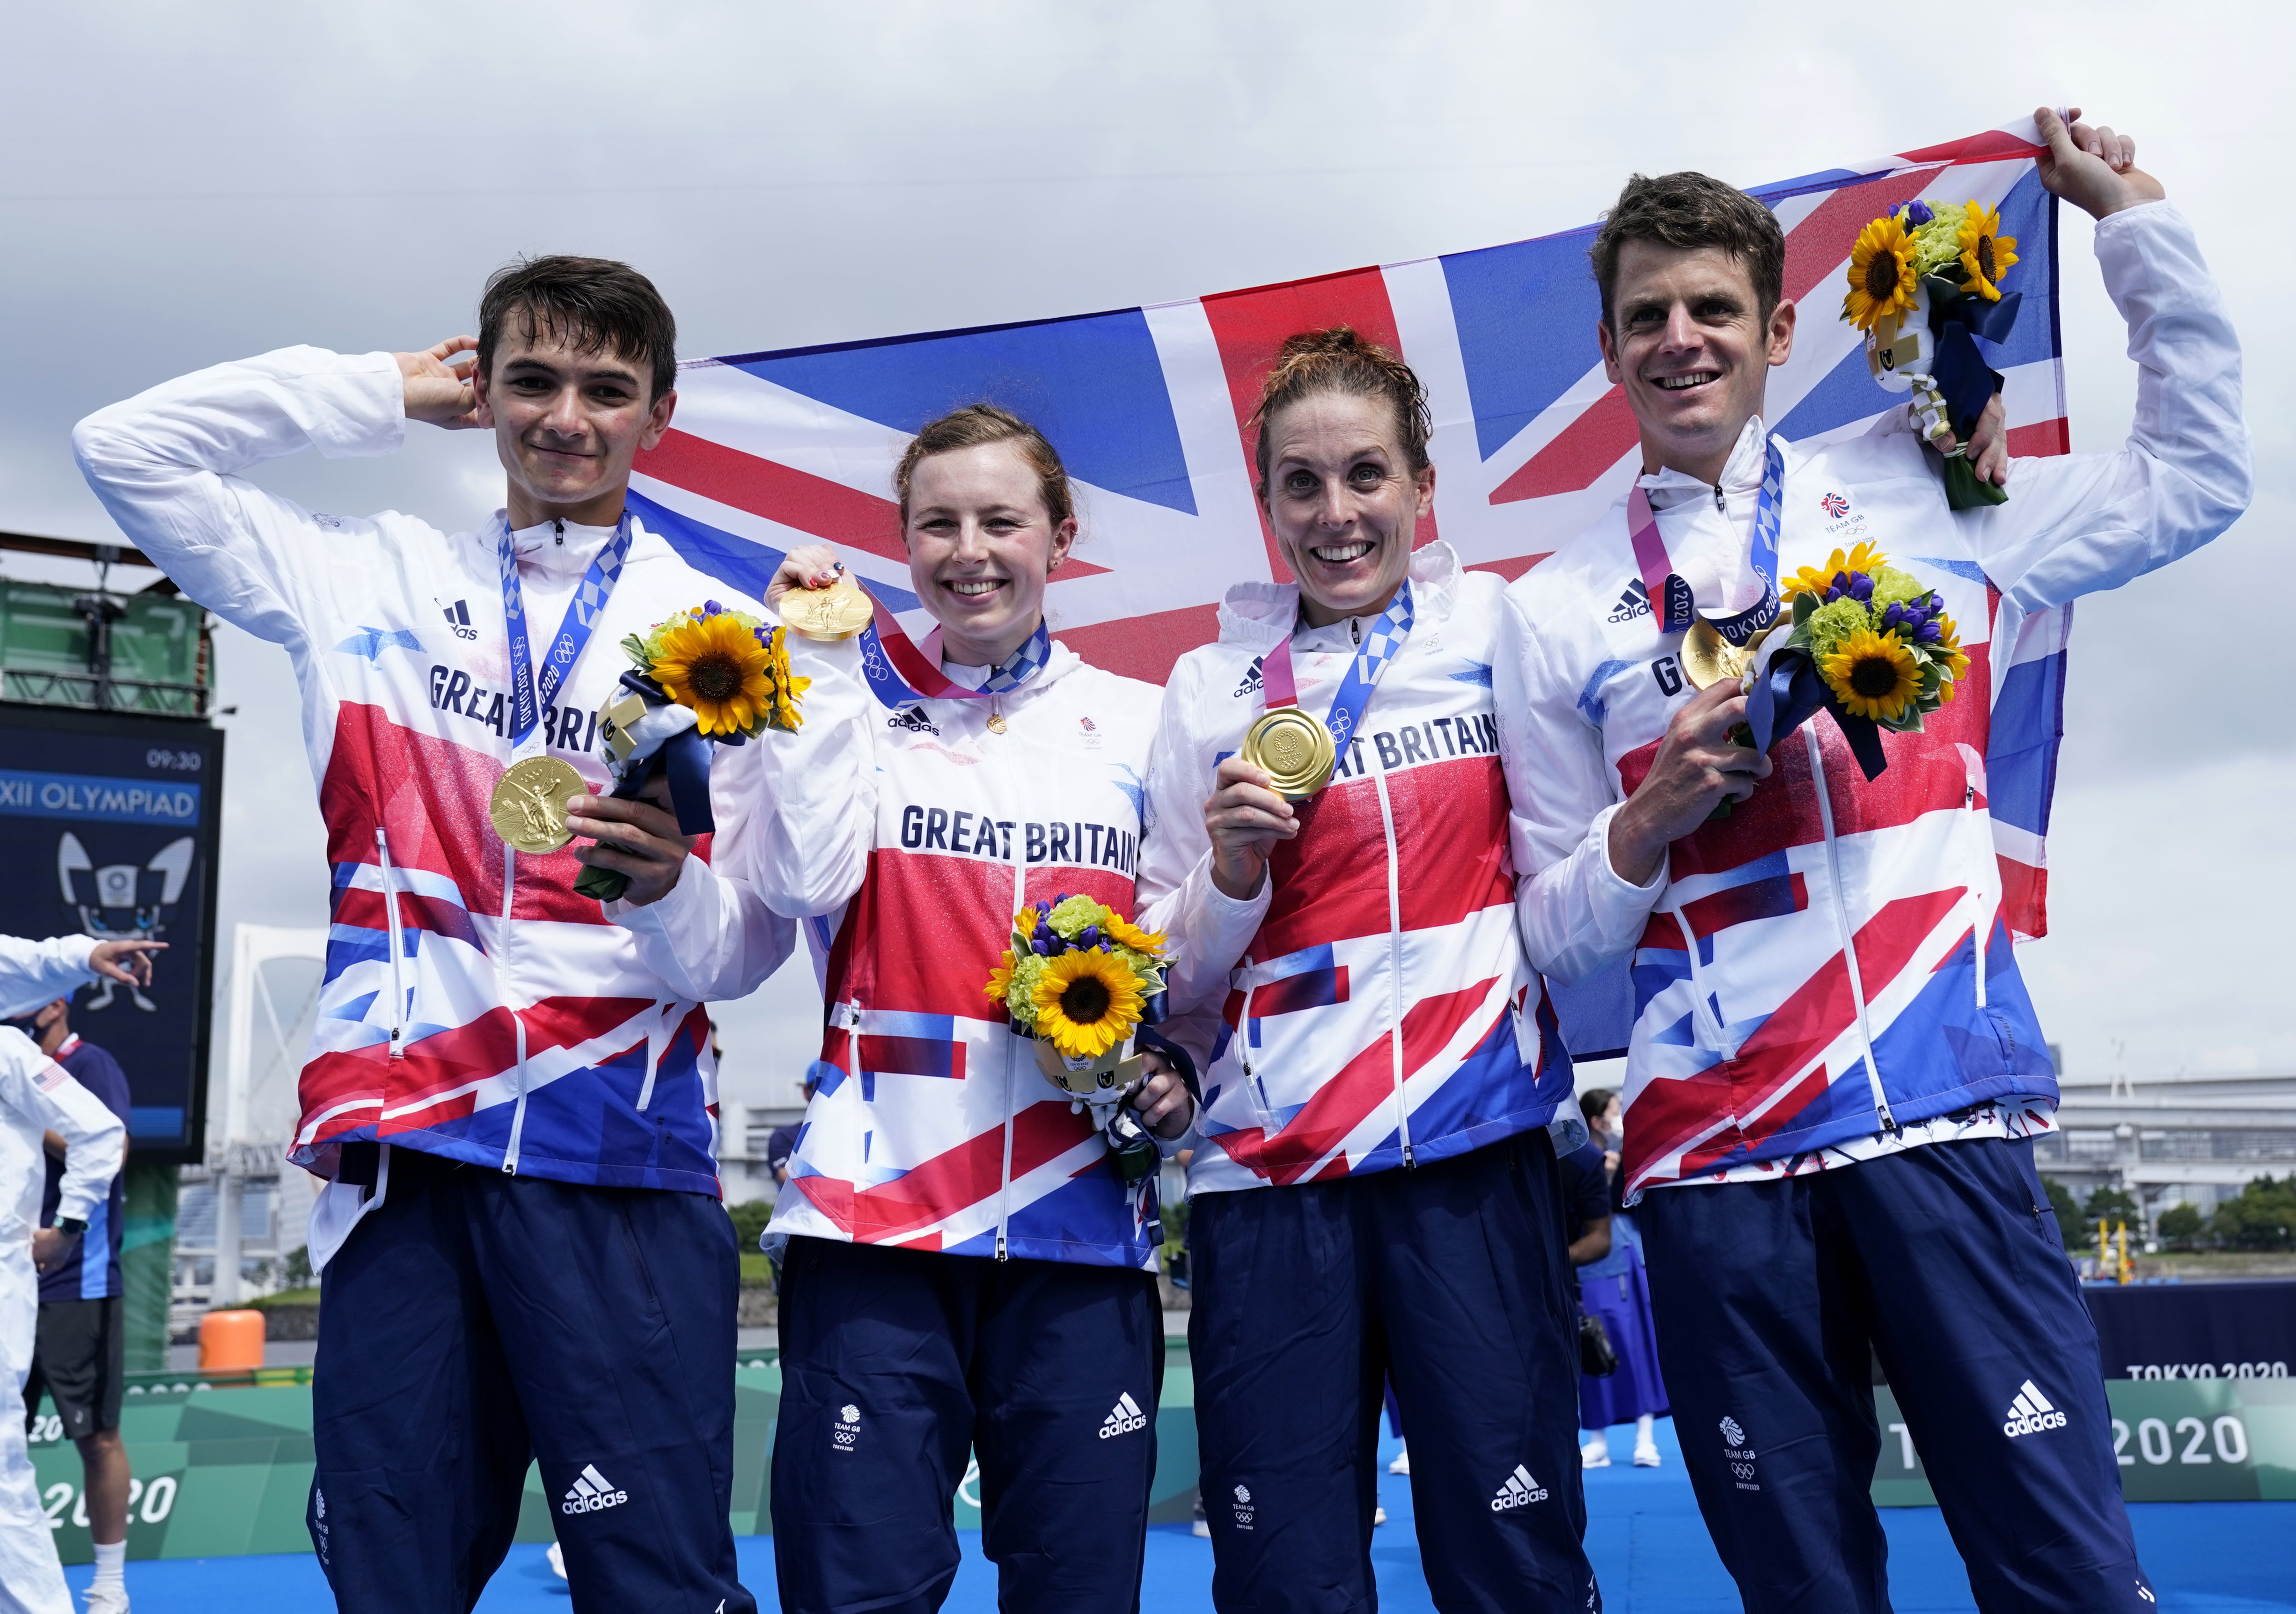 Alex Yee, Georgia Taylor-Brown, Jessica Learmonth and Jonny Brownlee took Olympic gold (Danny Lawson/PA)